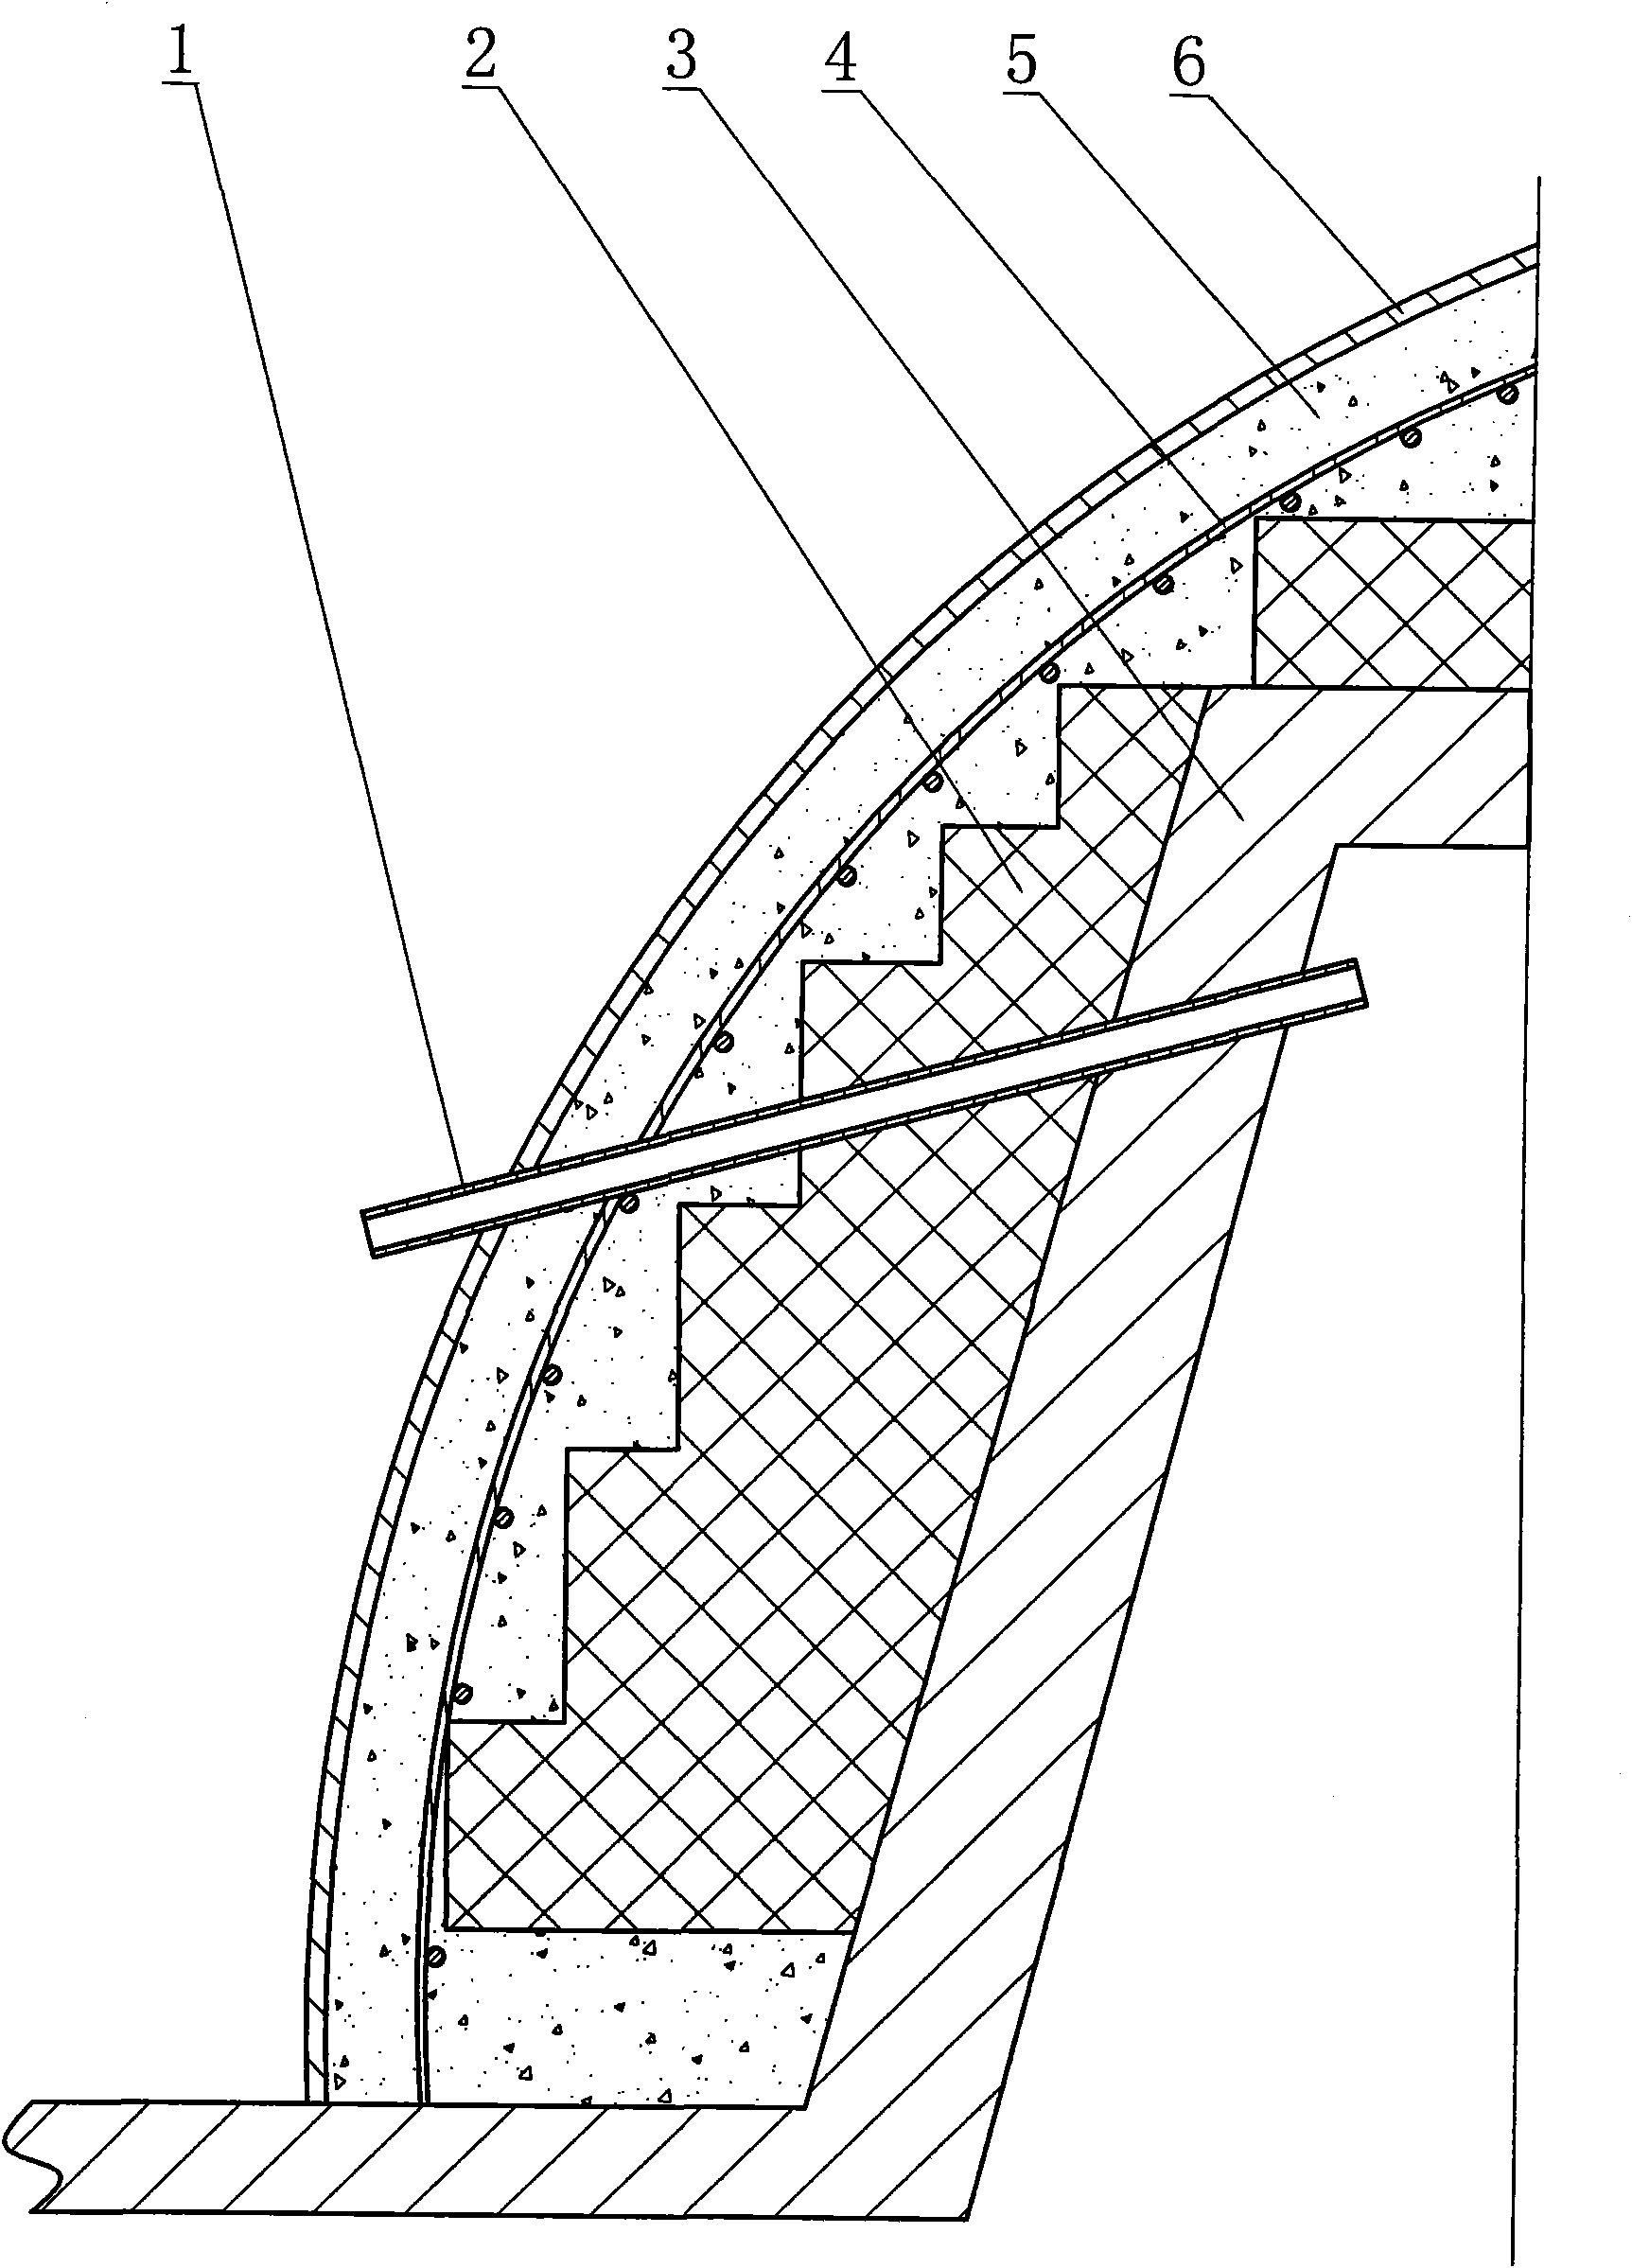 Construction method of hyperboloidal concrete structure of coal tower storage bunker incline wall